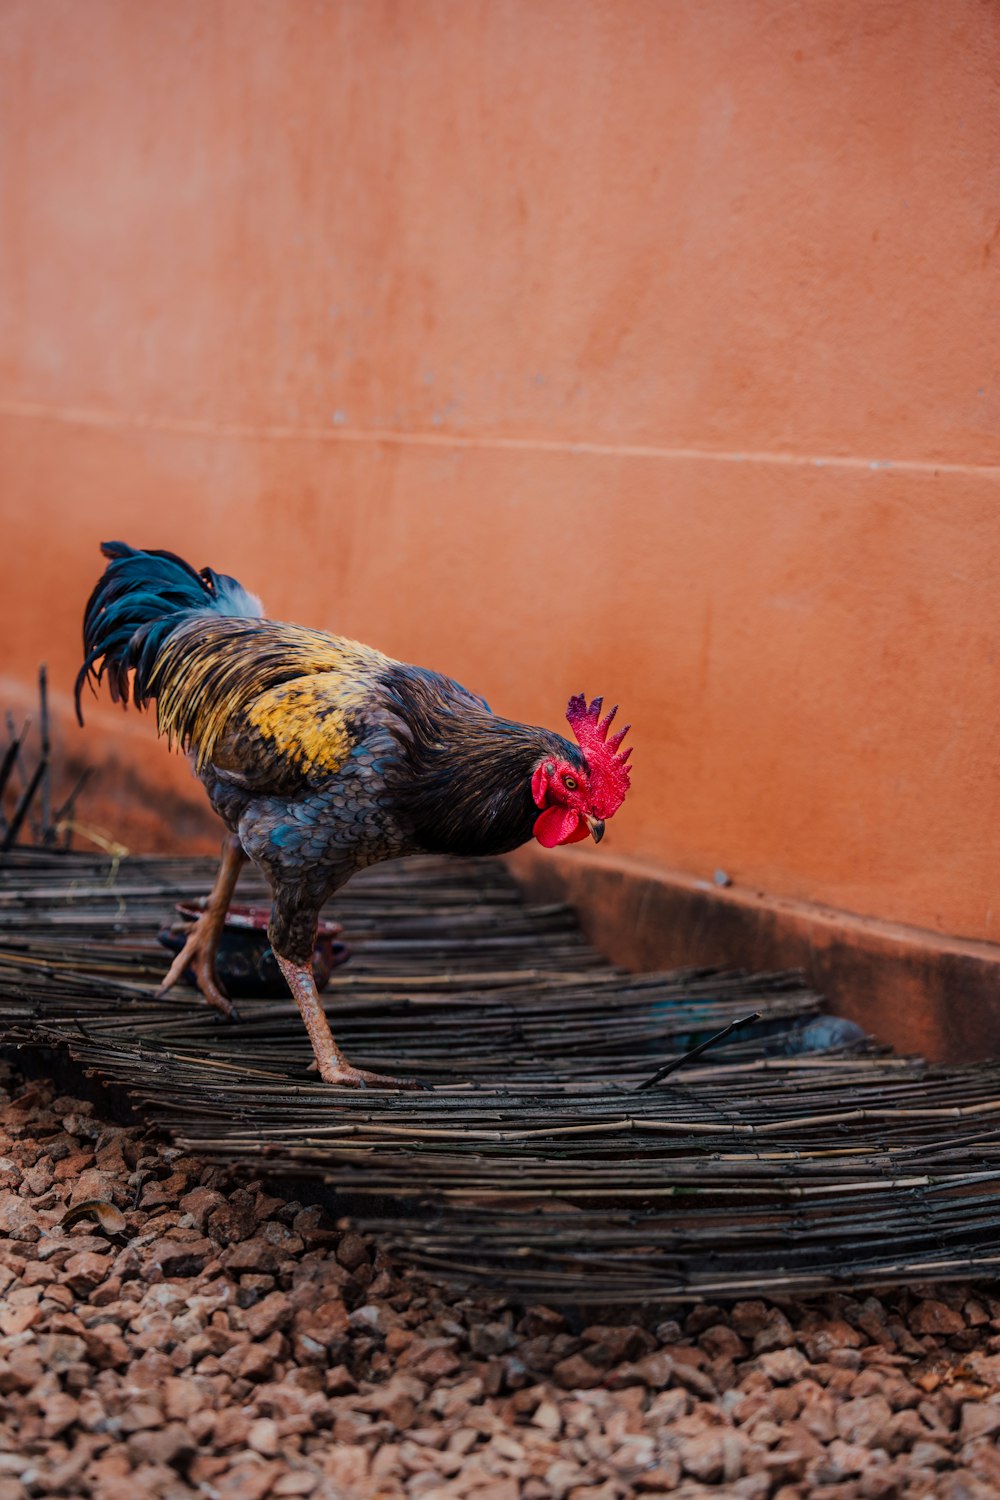 a rooster with a red and yellow comb walking around